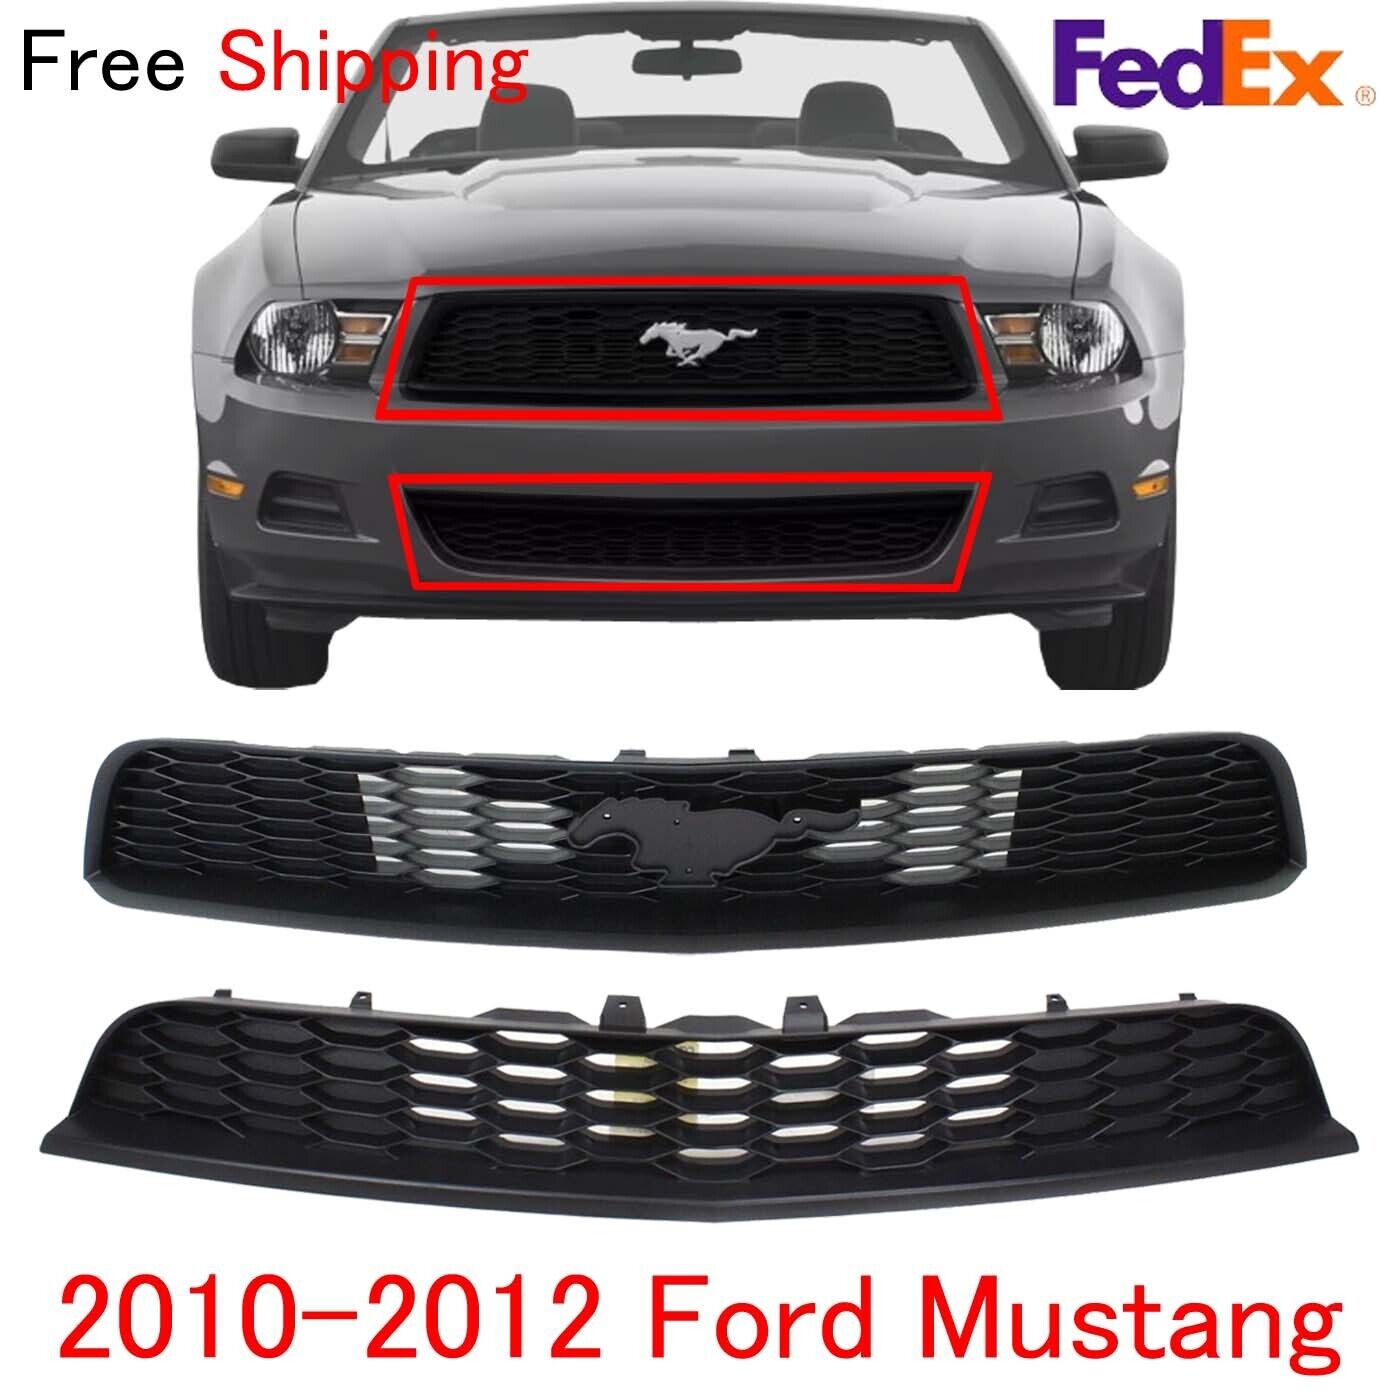 For 2010-2012 Ford Mustang Bumper Grille Front Textured Plastic Set 2pc